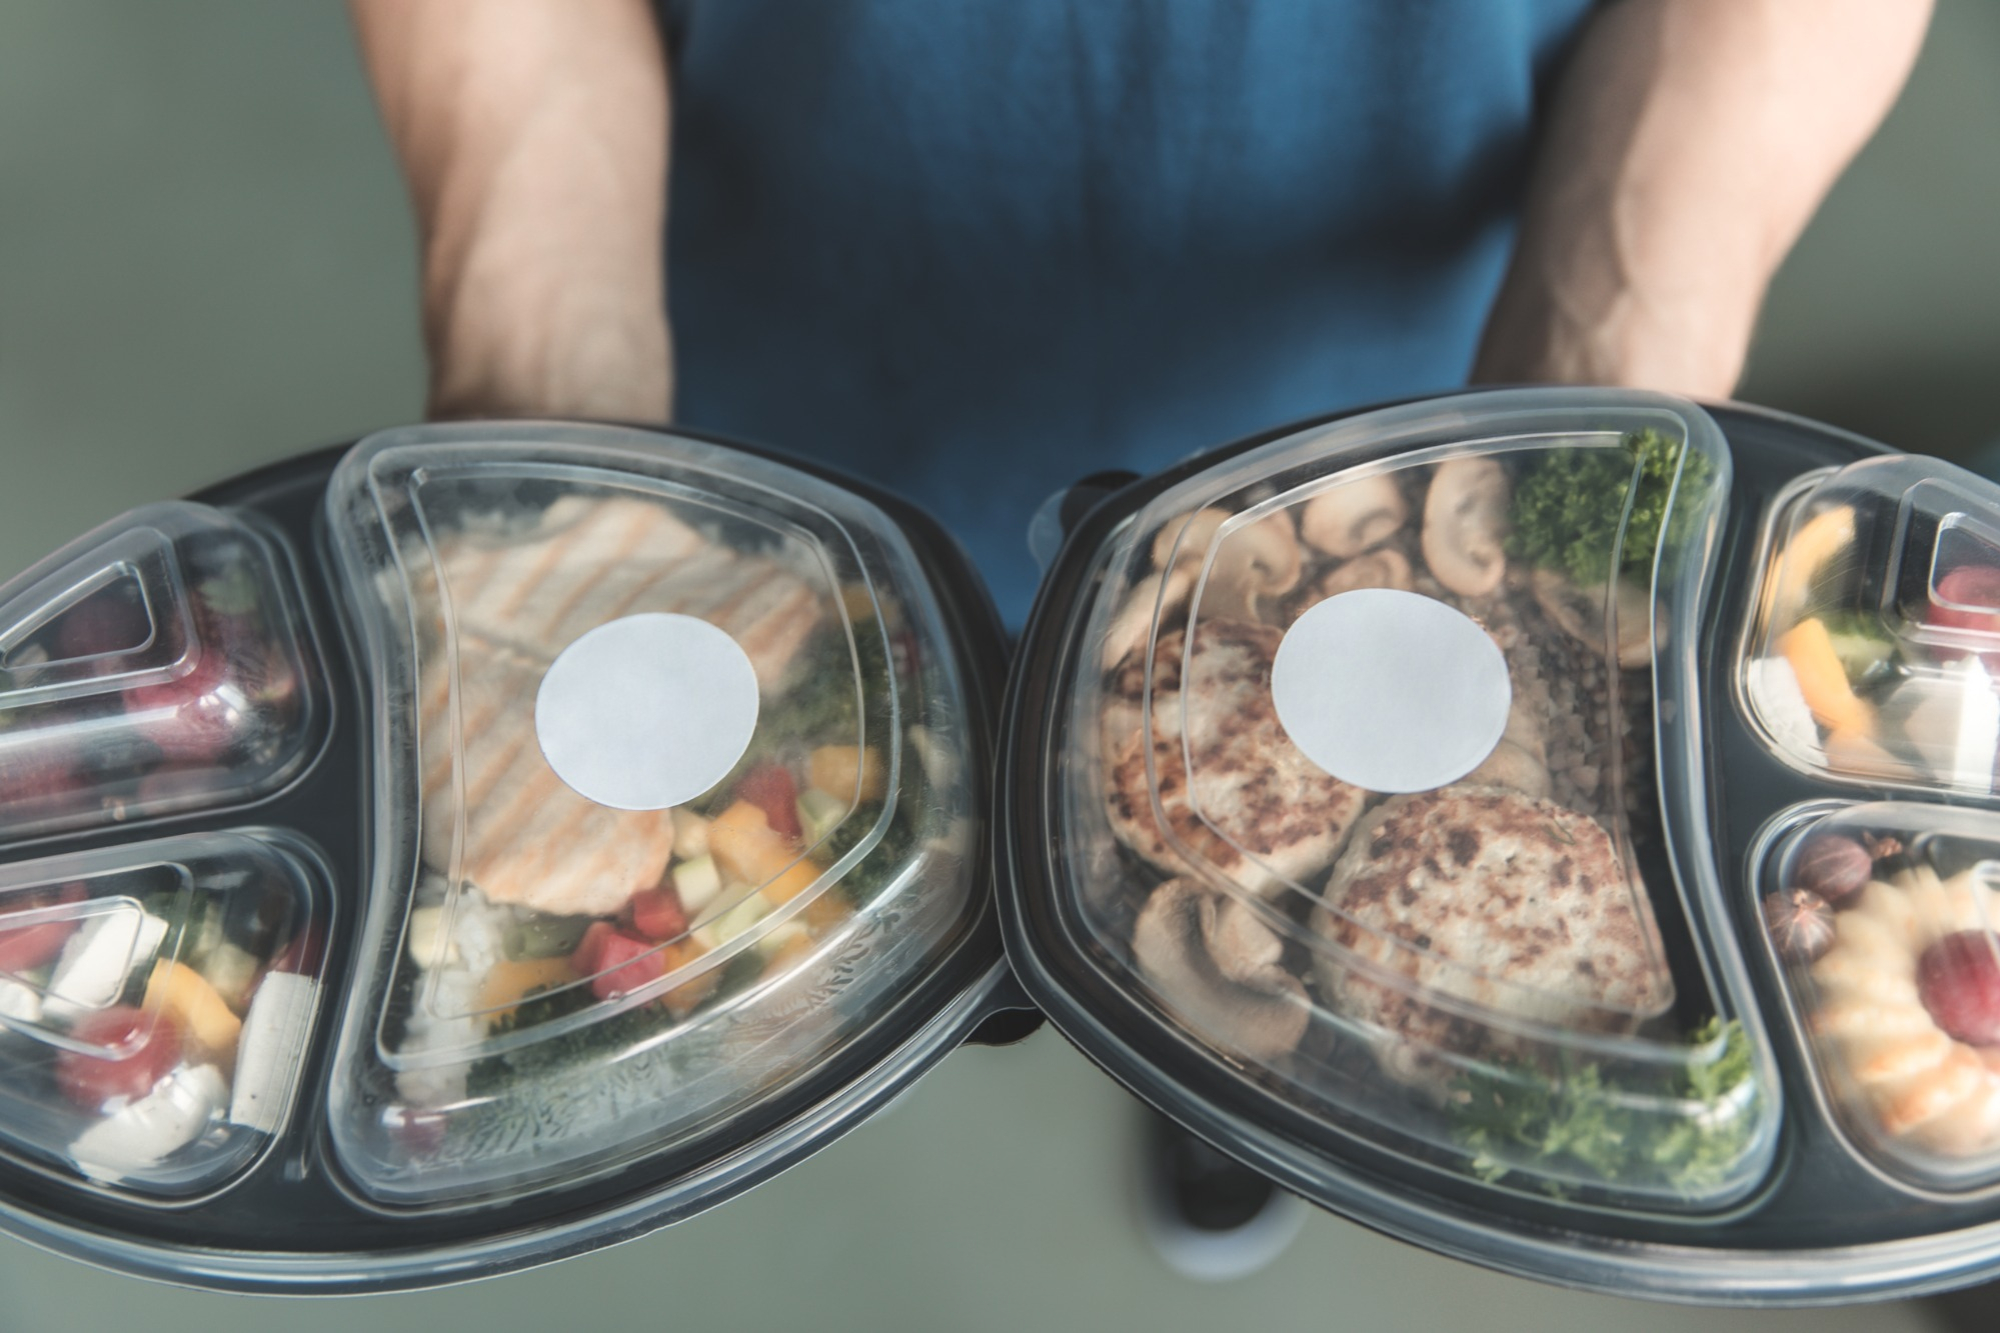 Meals catering to different health needs could help save lives—and billions of dollars